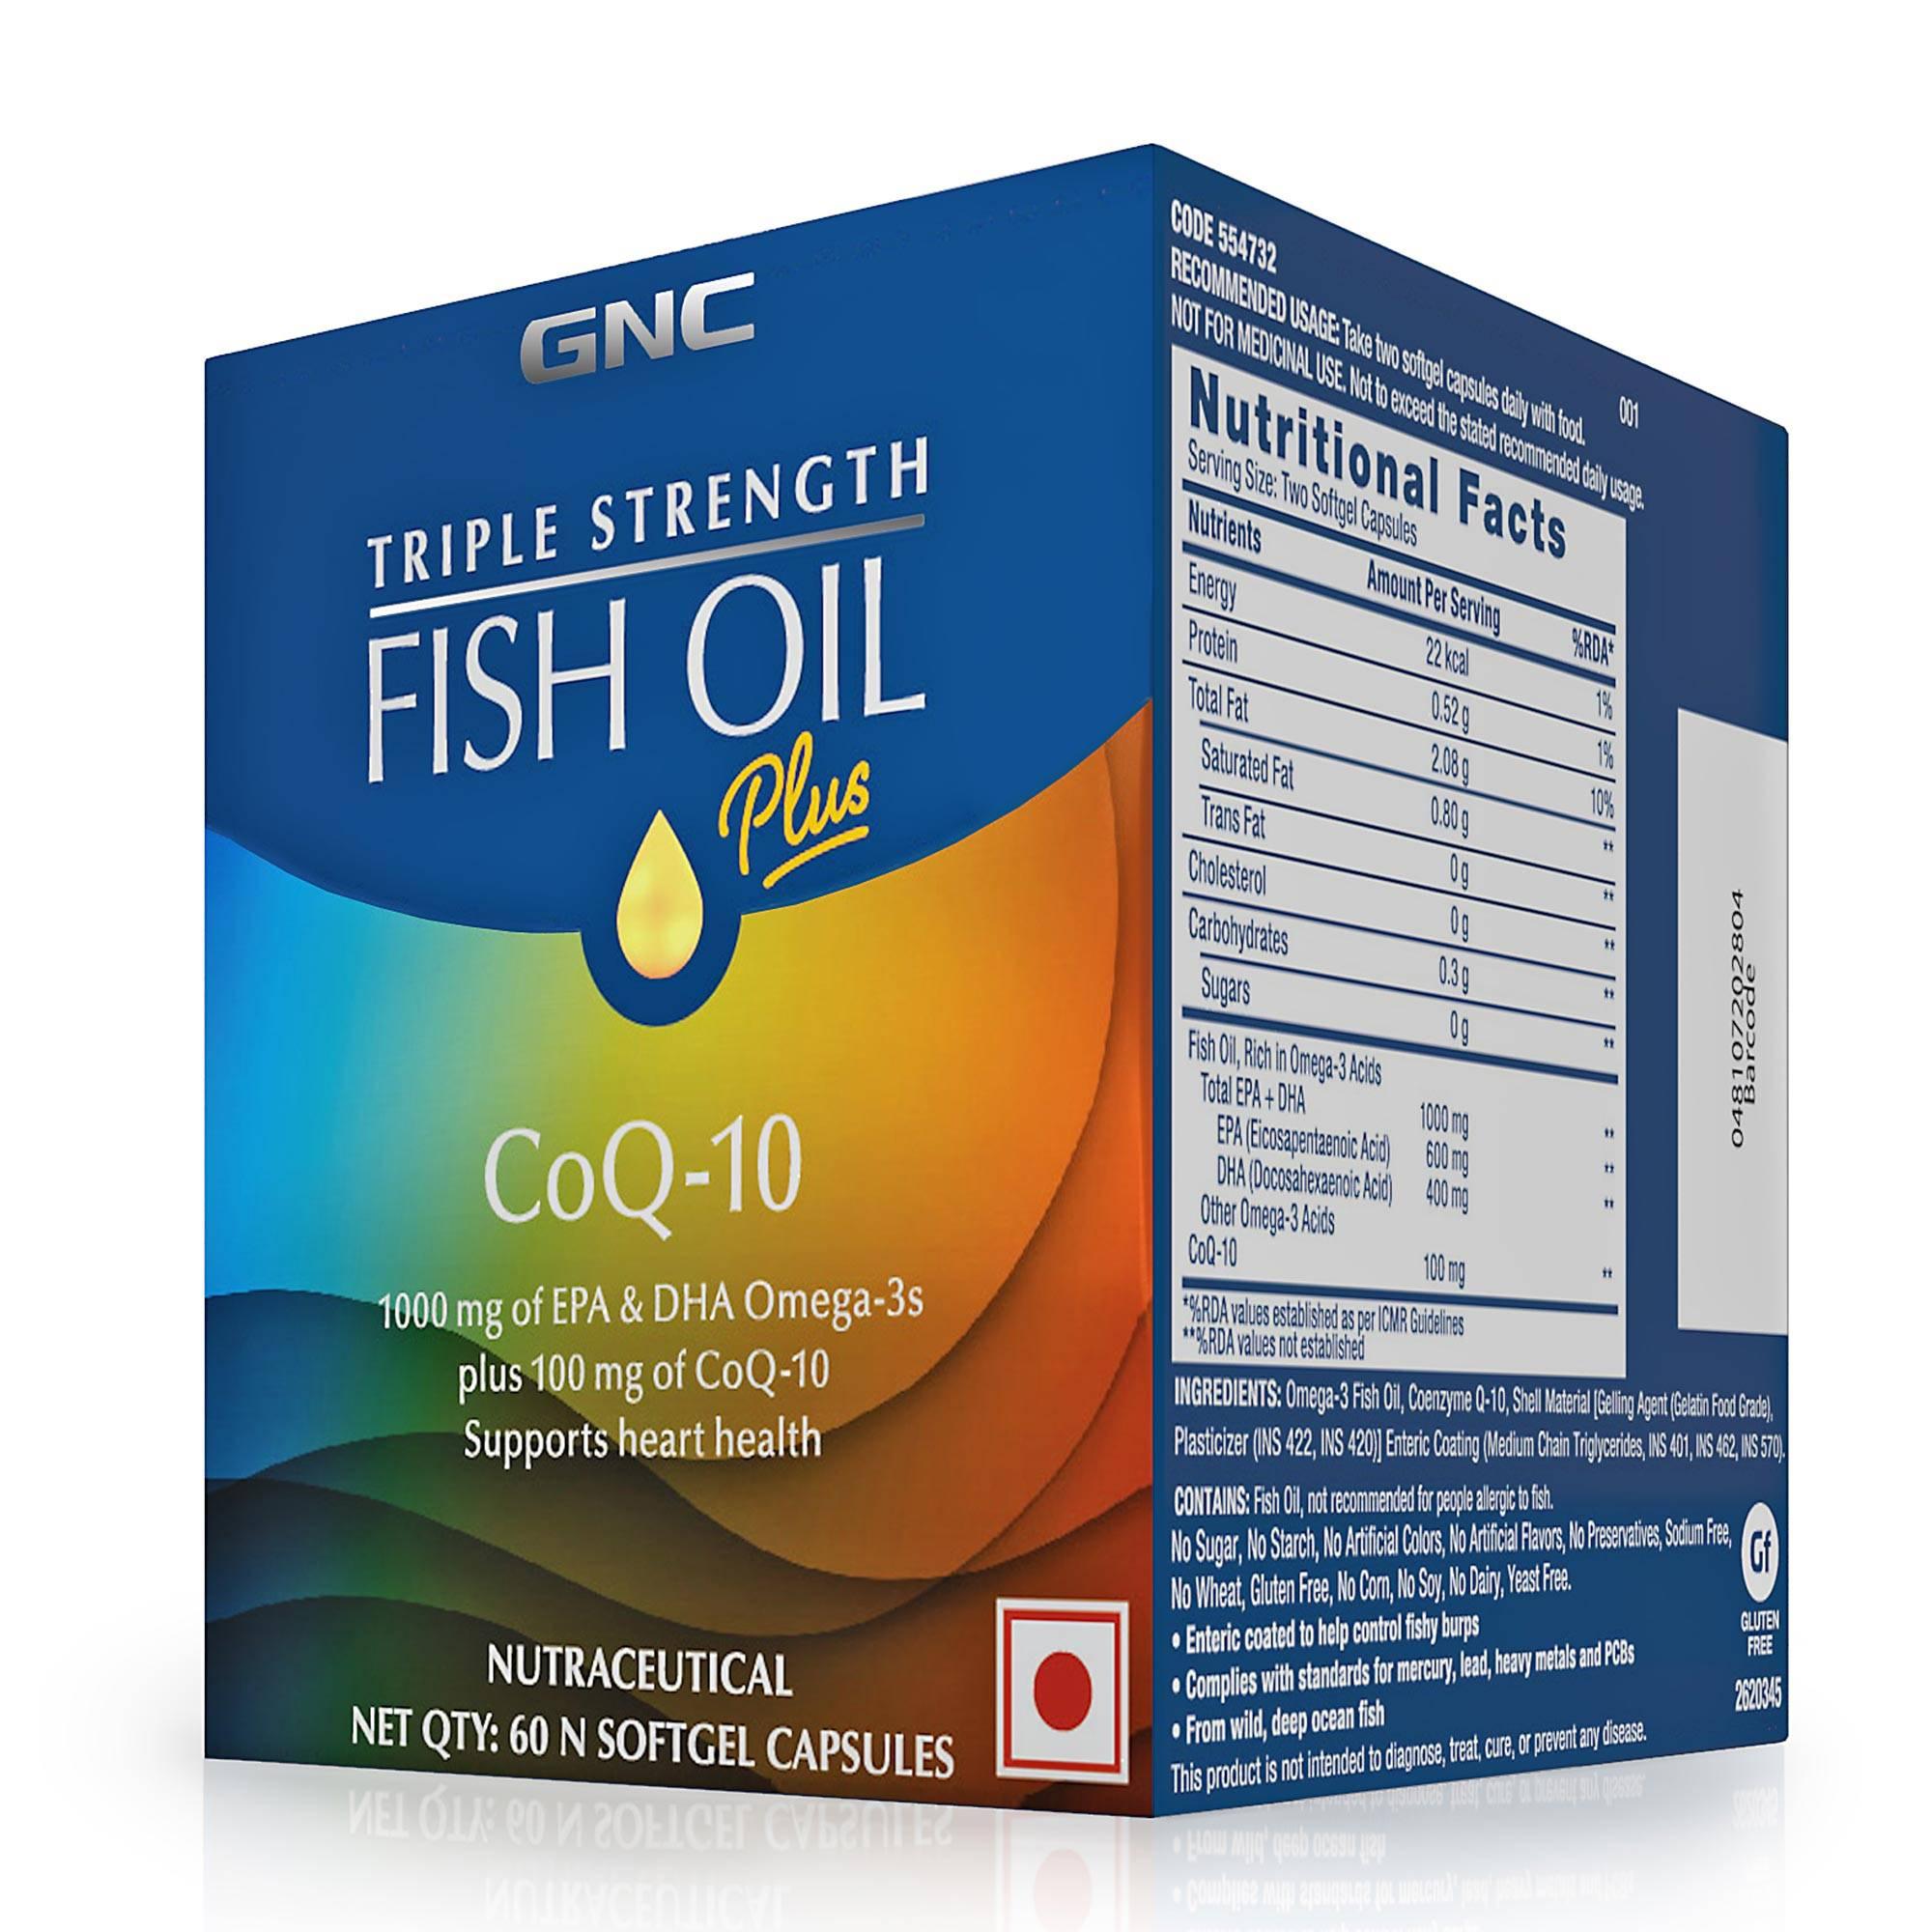 GNC Triple Strength Fish Oil Plus CoQ-10 - Promotes Heart Health and Overall Wellbeing - GNC India